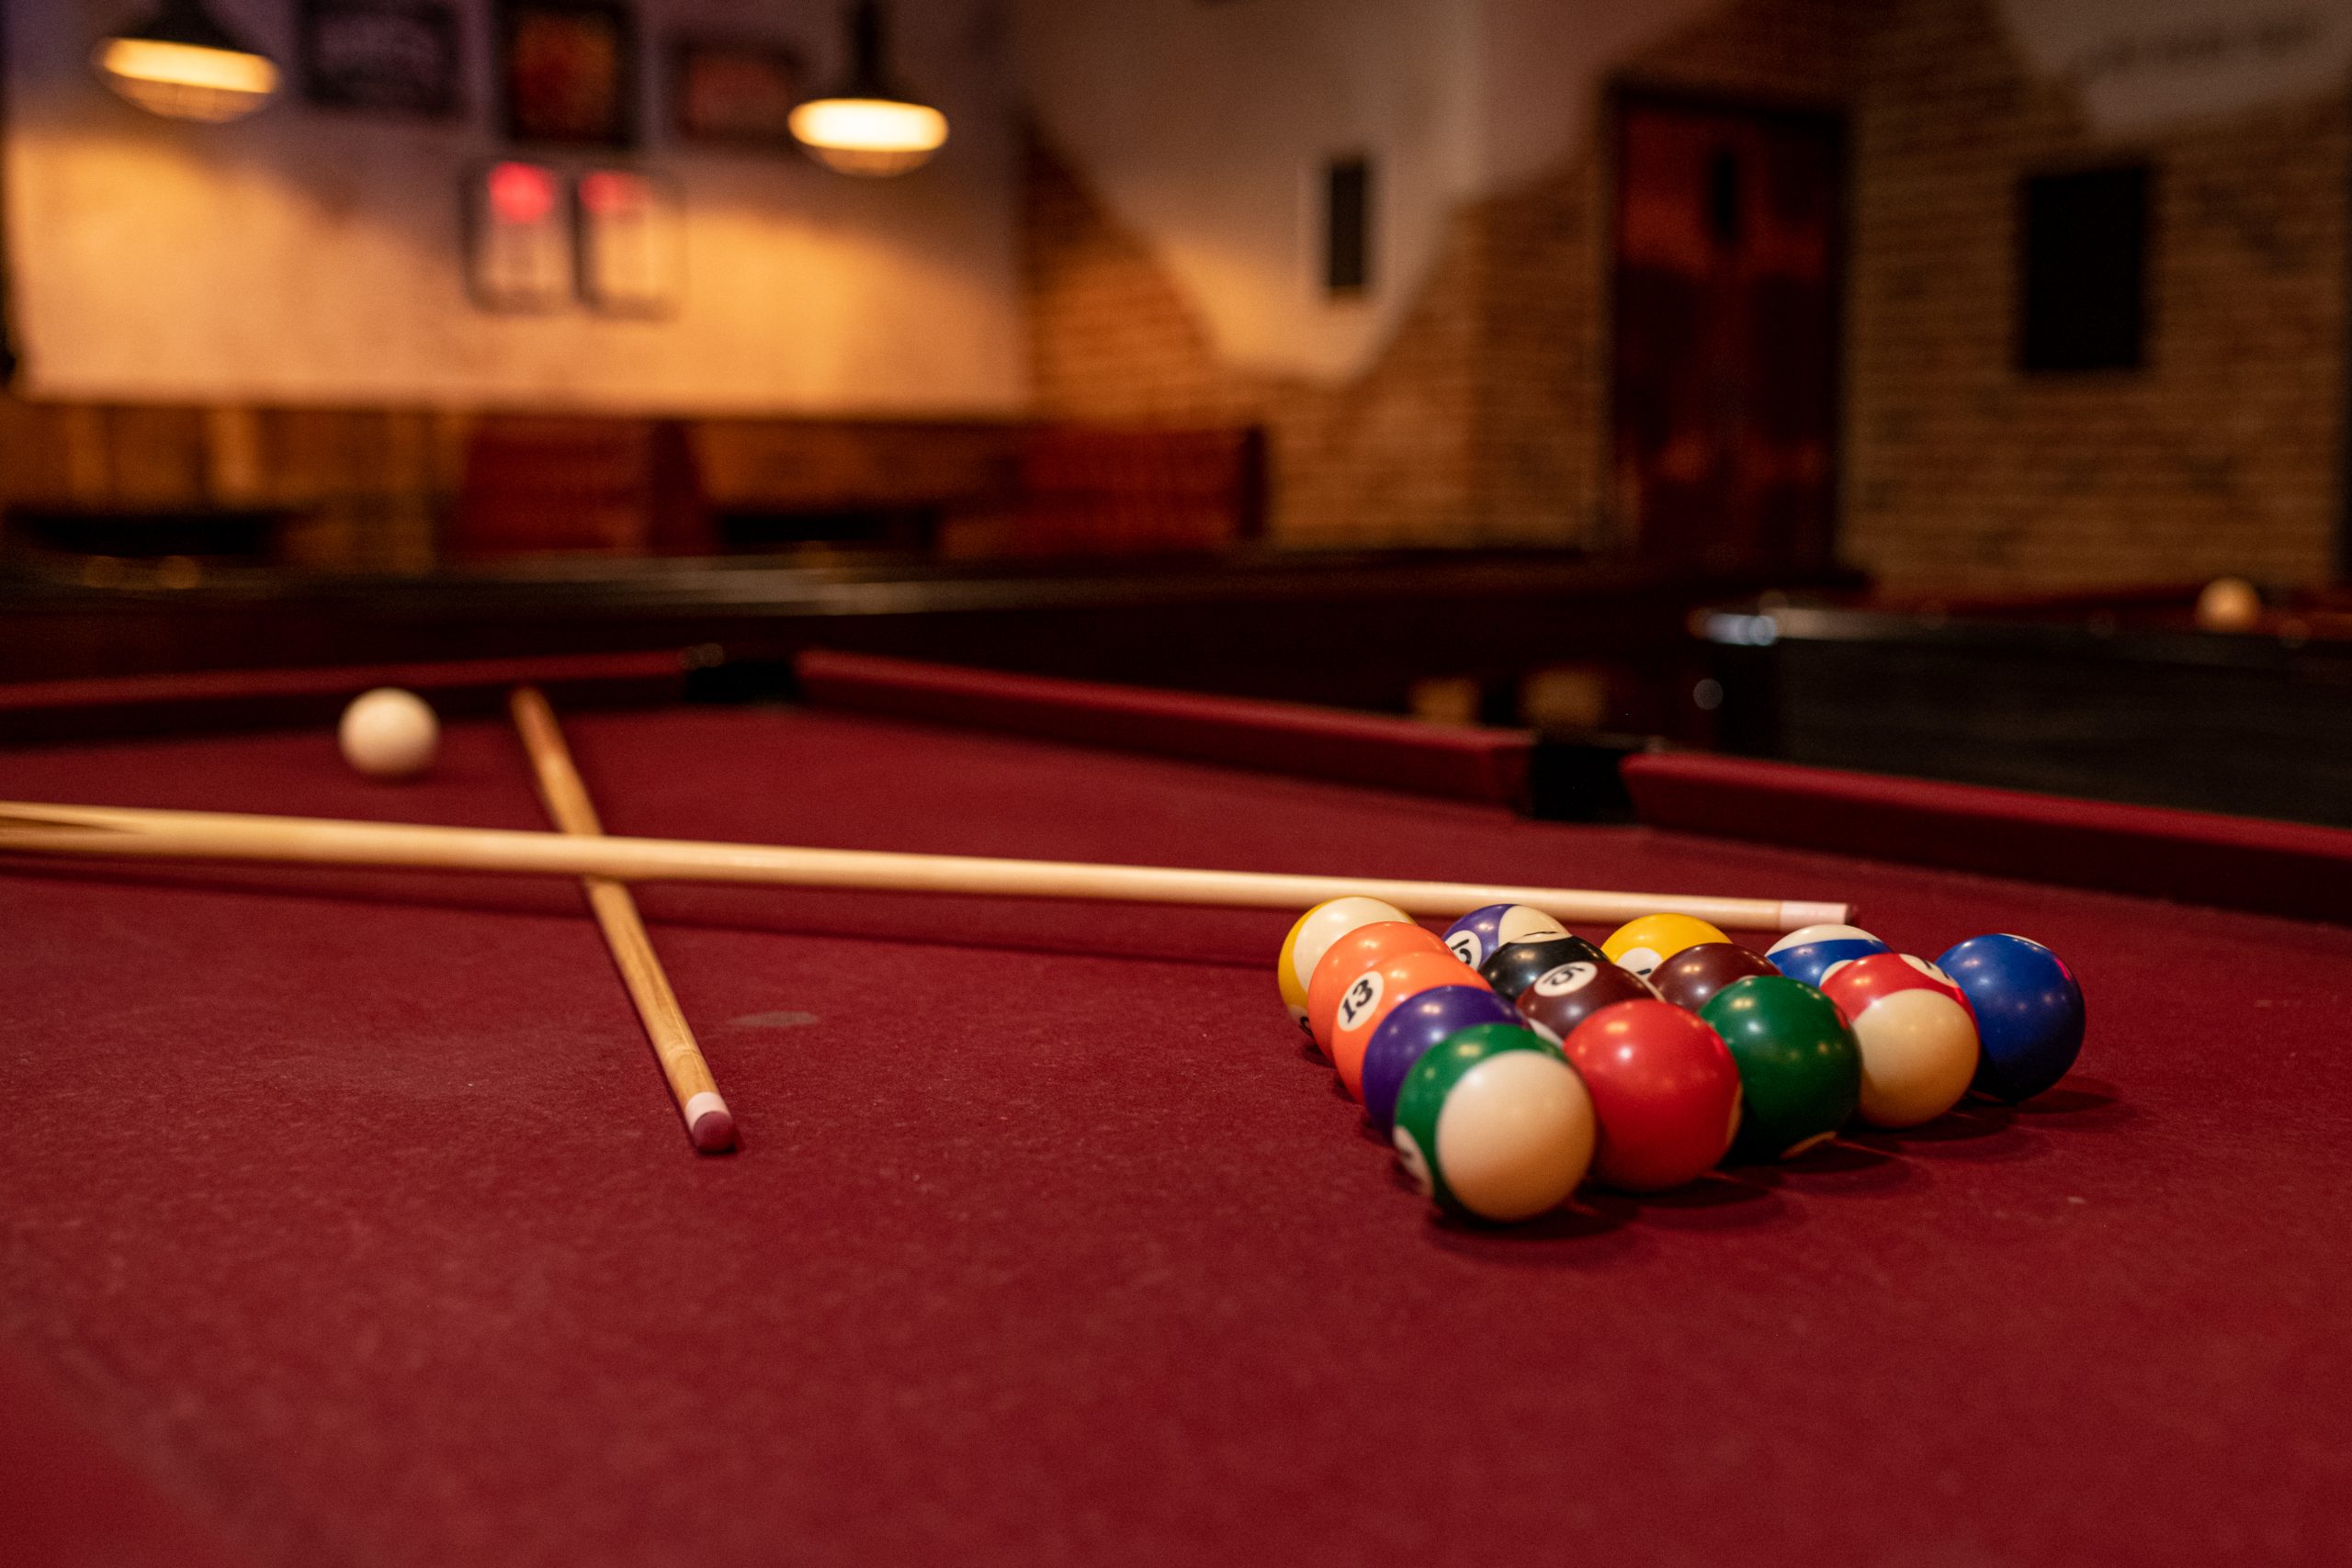 Enjoy a game of pool with friends at Firepit bars